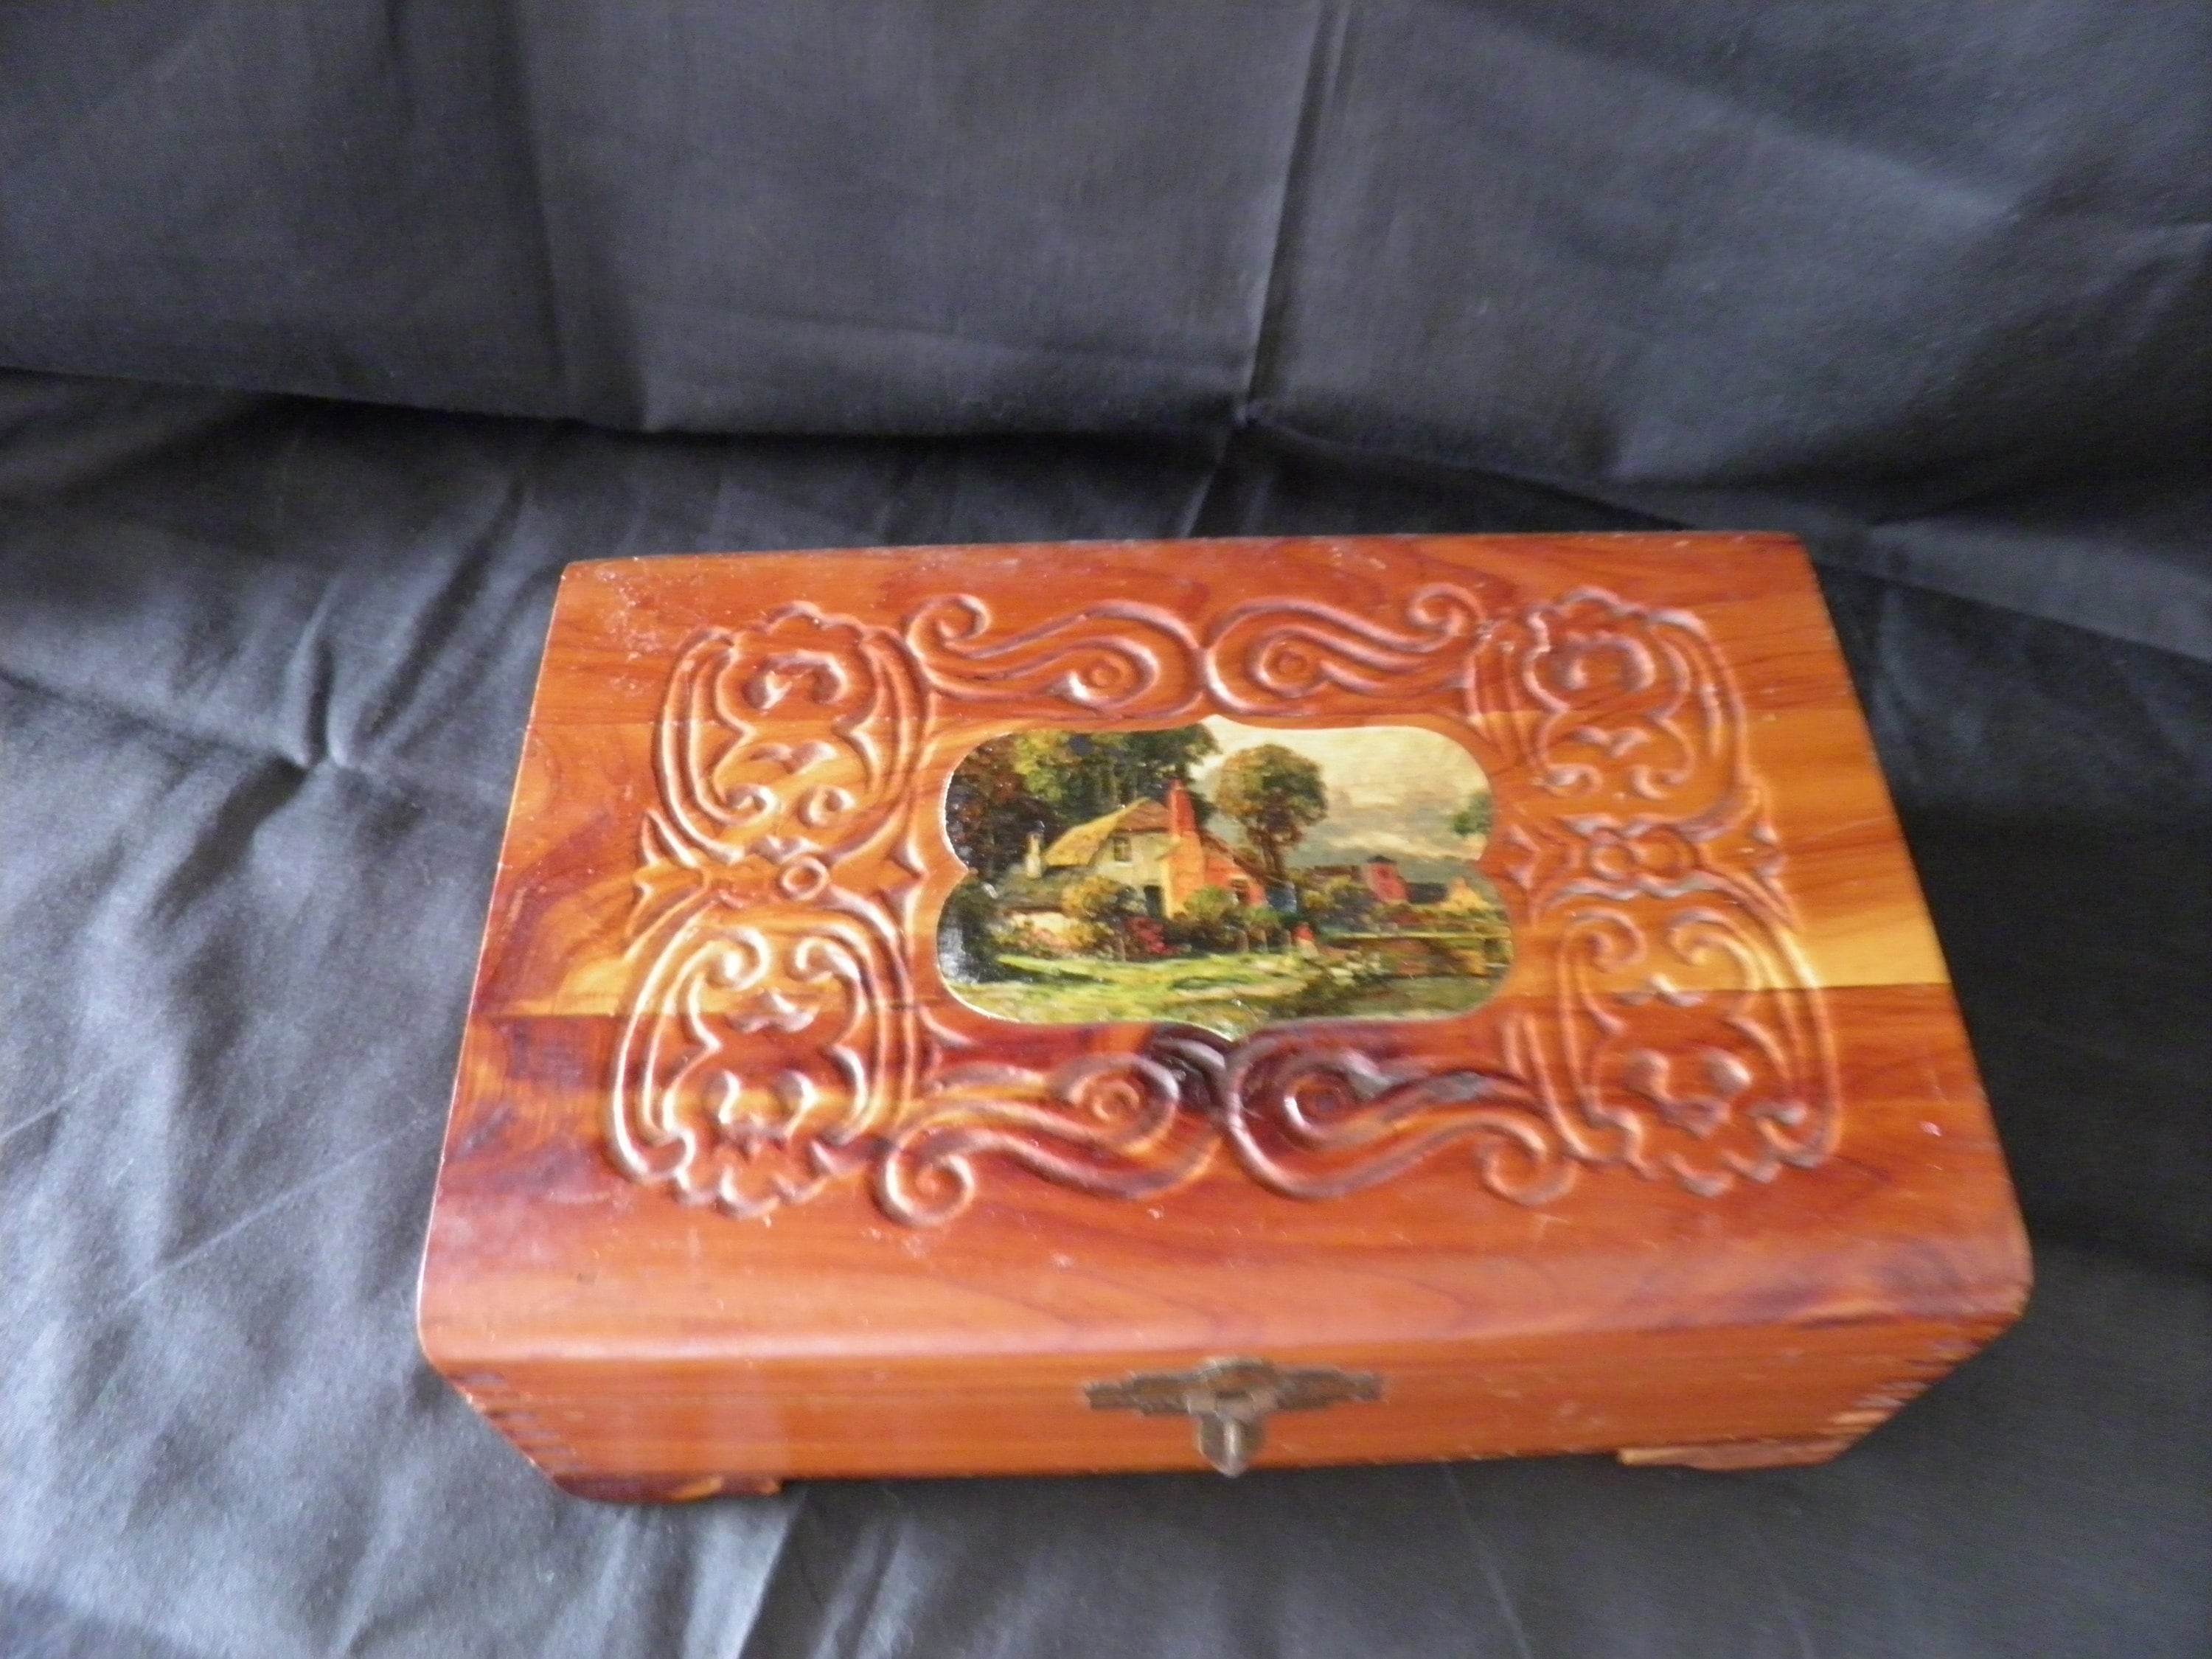 Jewelry Vintage Carved Wood Cedar Box with Dove Tailed Joints Storage or Organization